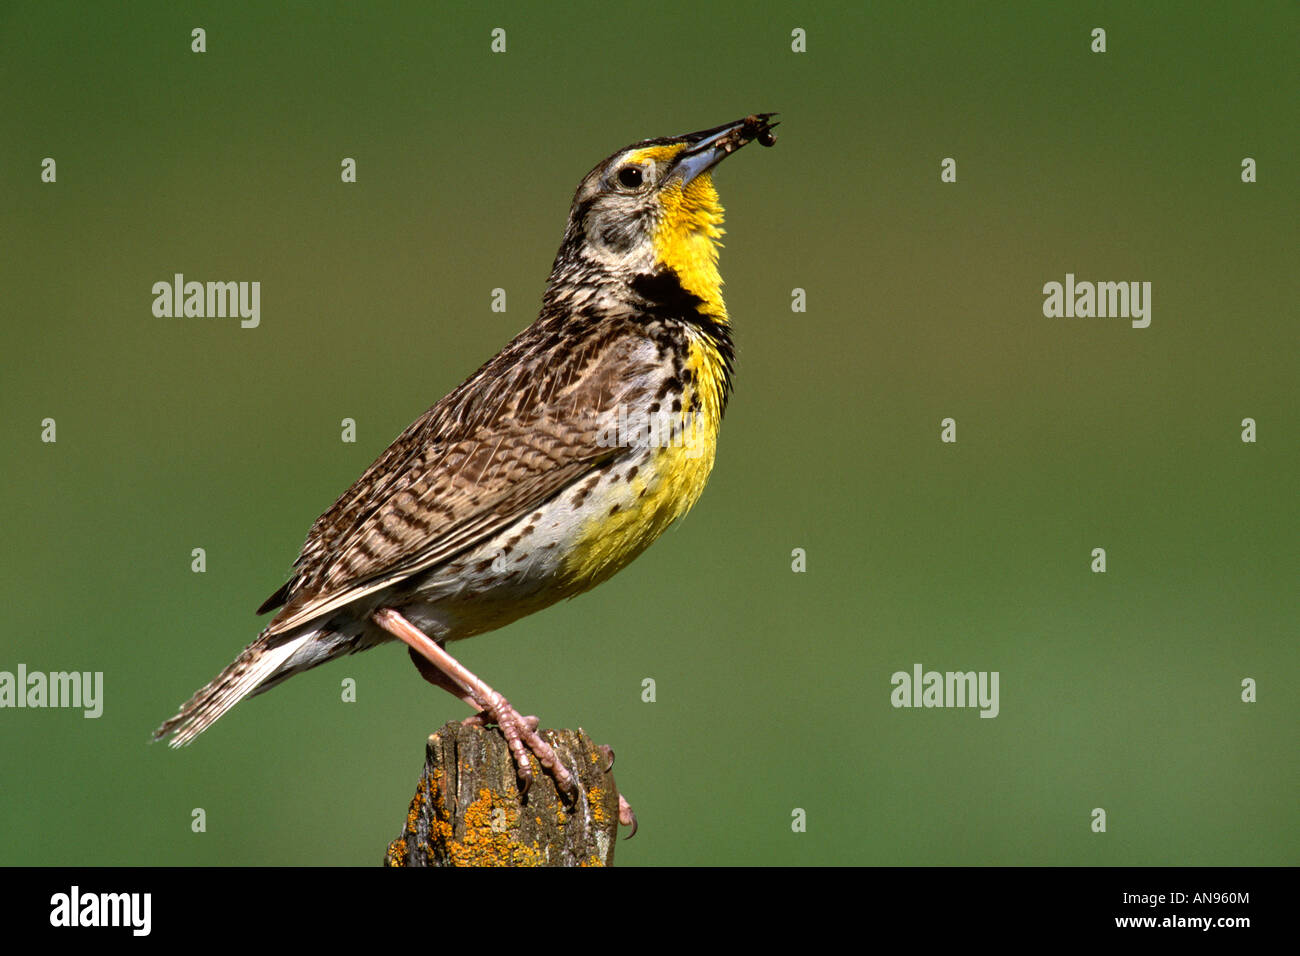 Western Meadowlark Perched with Insect Stock Photo